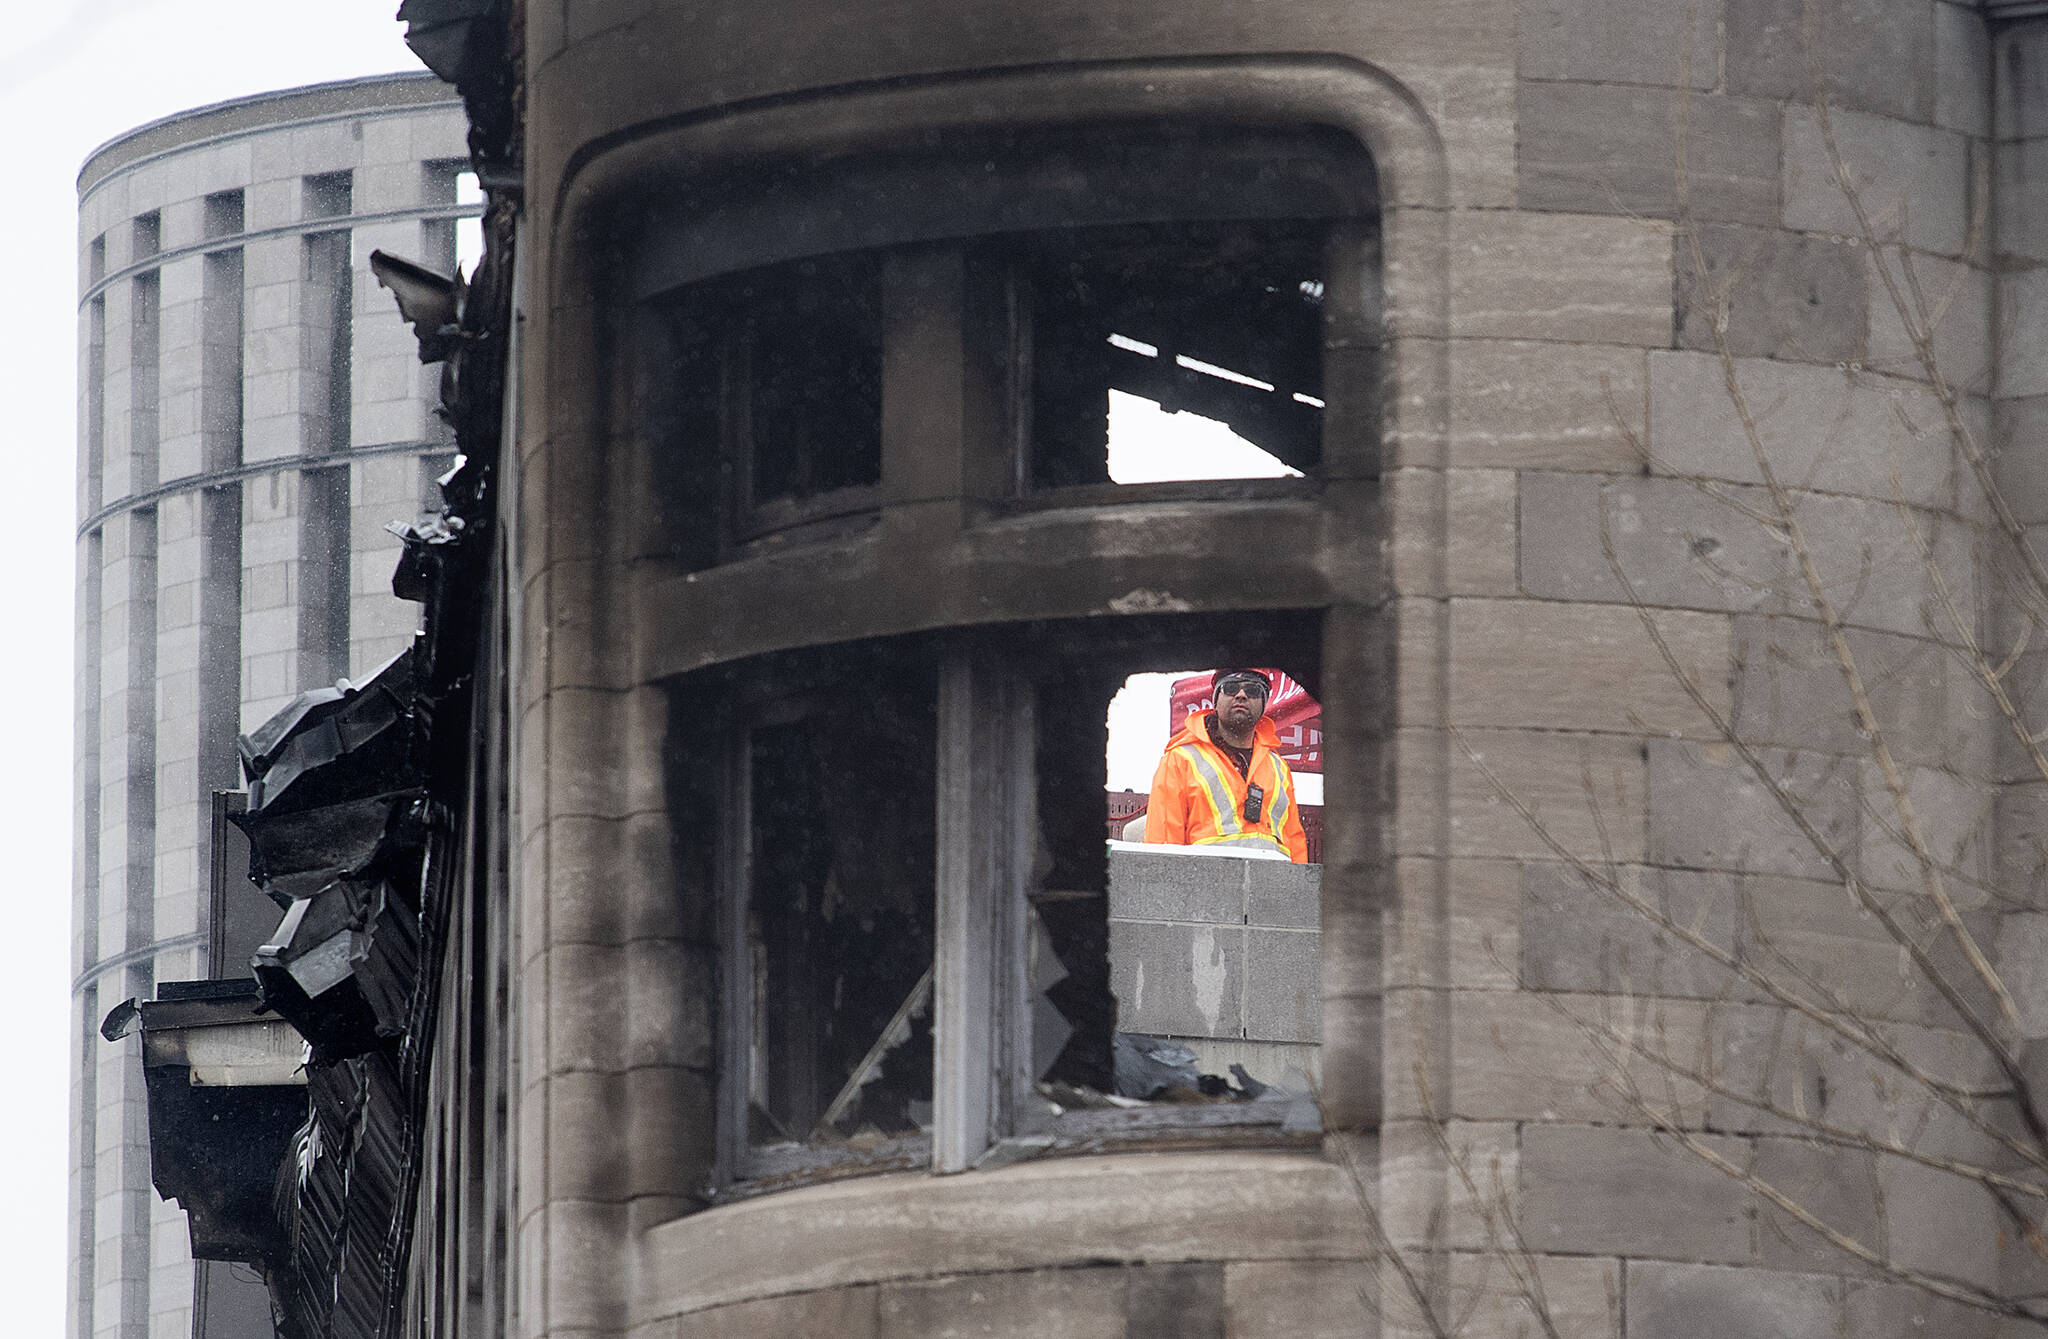 A worker is shown next to a building that was gutted by a fire in Montreal, Thursday, March 23, 2023. The heritage building went up in flames last week. Four bodies have been recovered and three people remain missing. THE CANADIAN PRESS/Graham Hughes